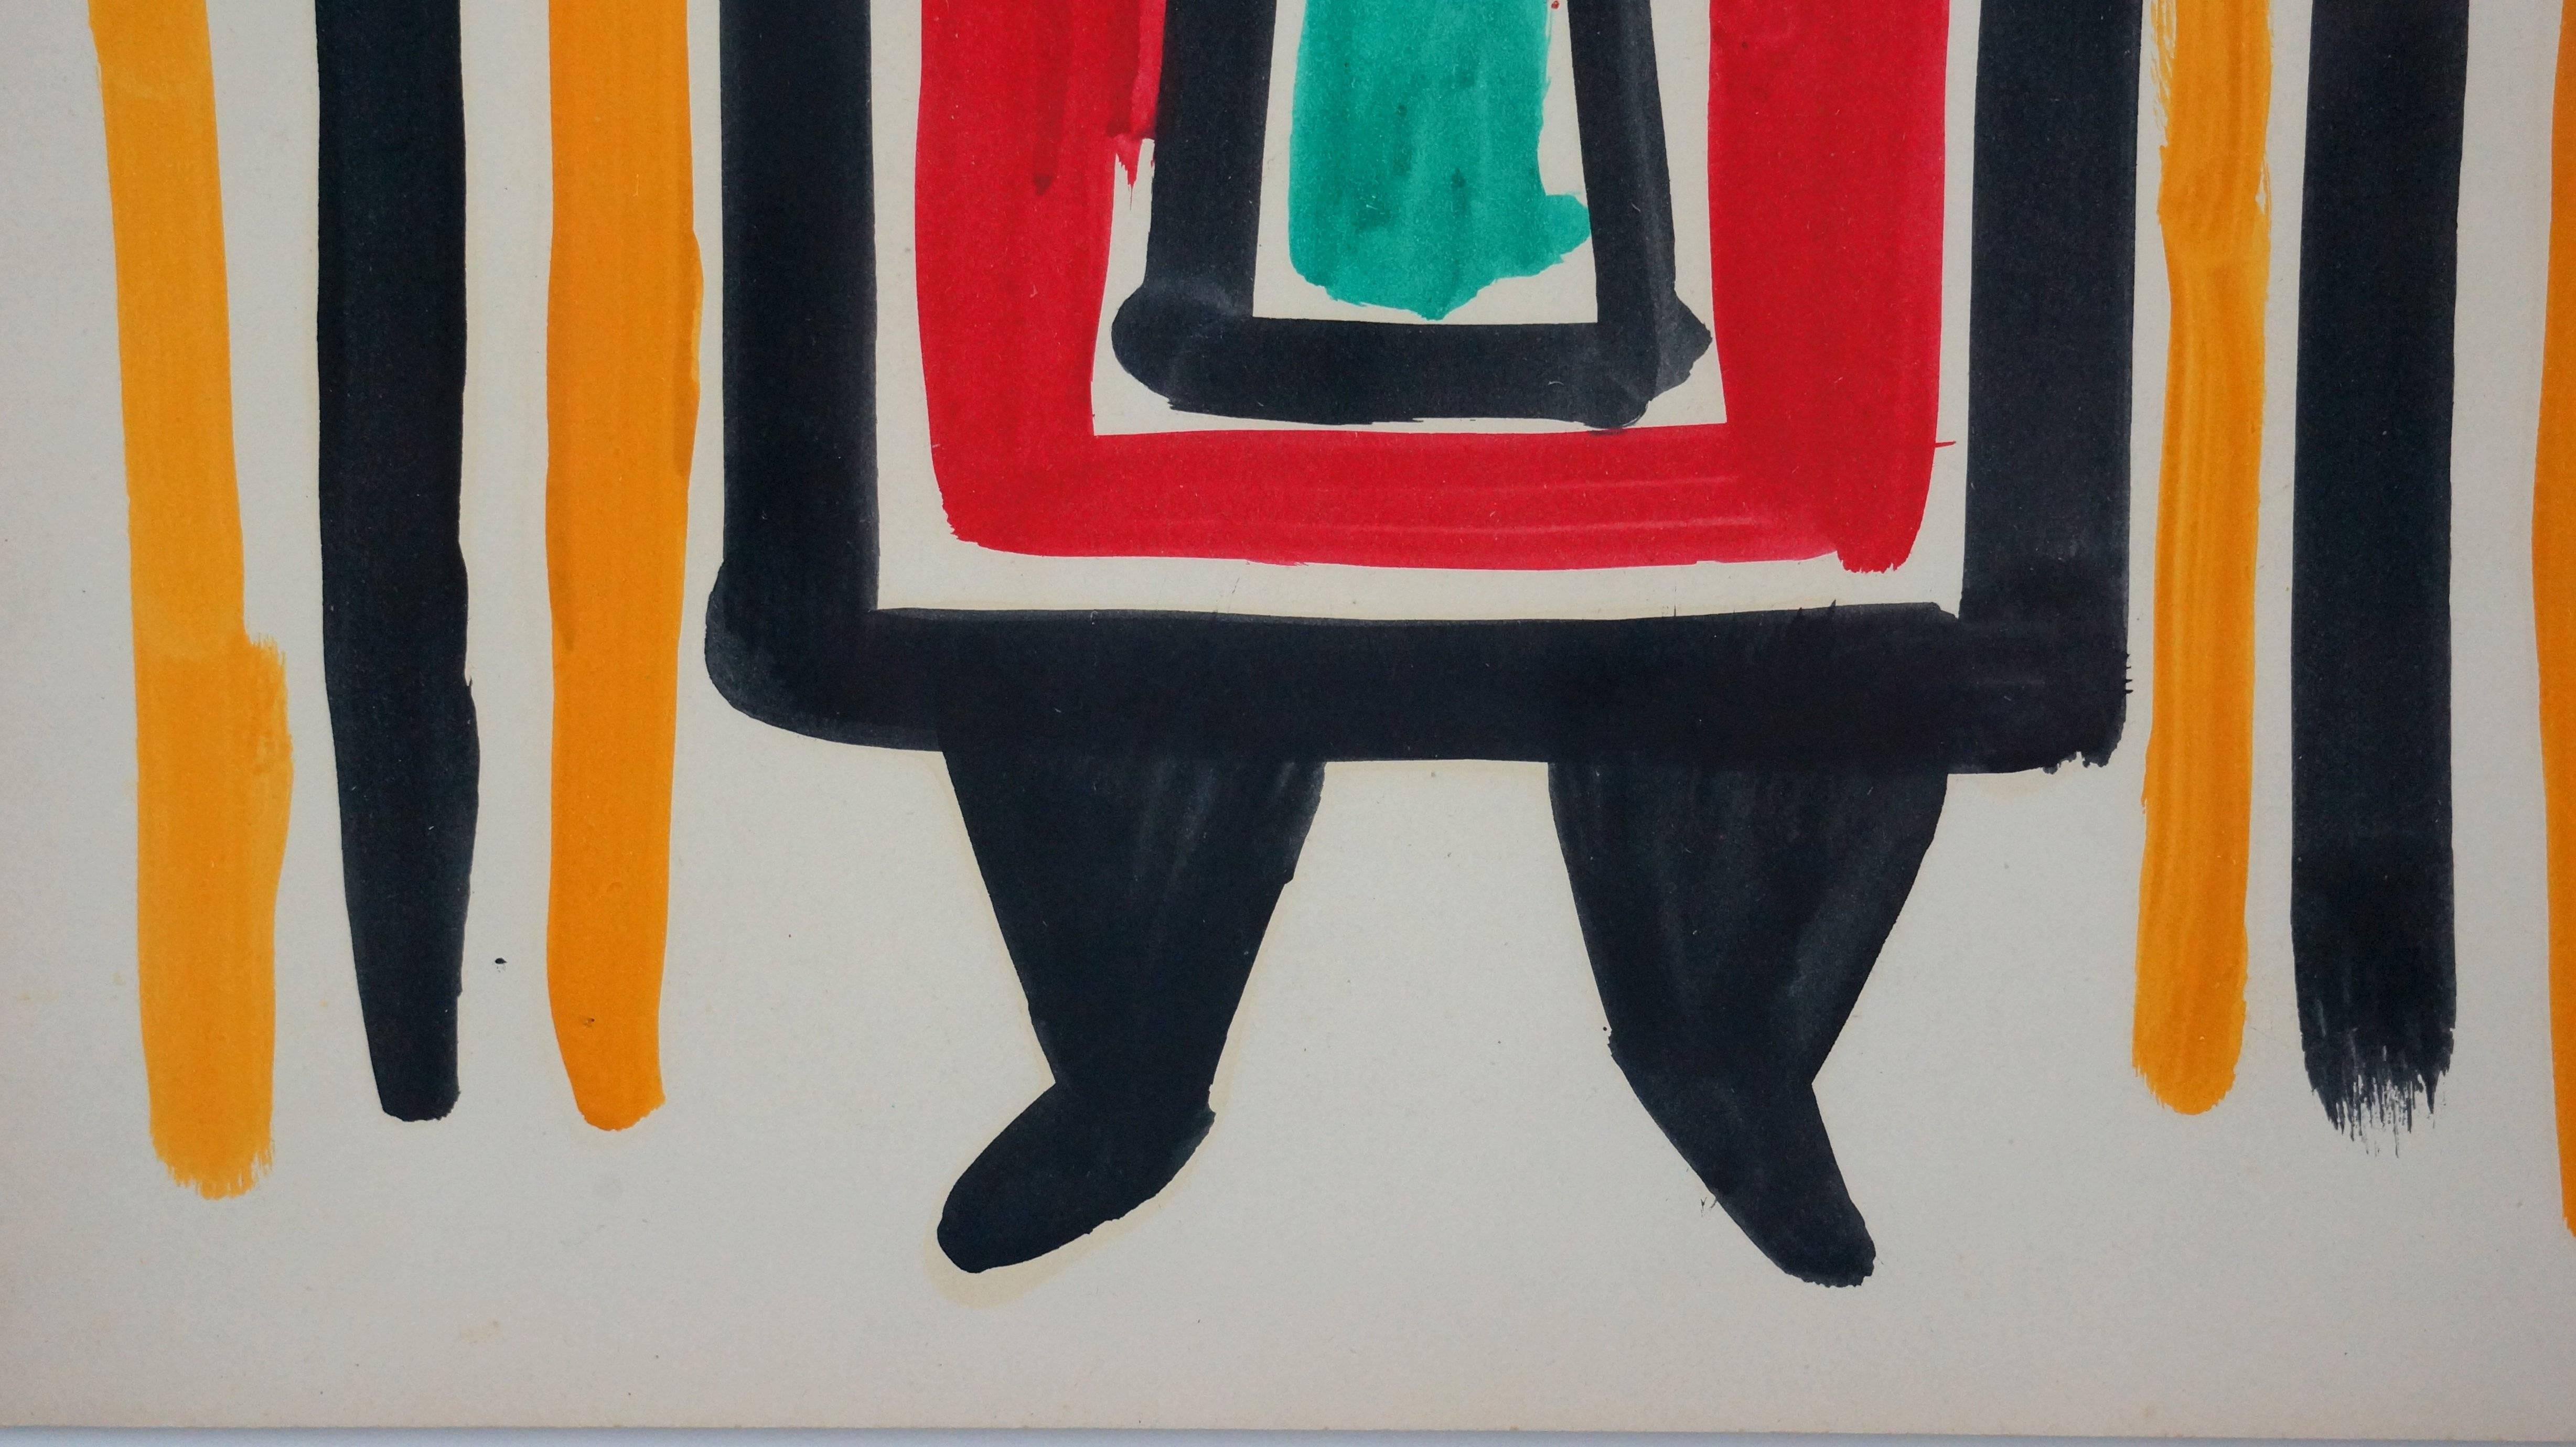 Gouache and oil on paper, signed lower right.
Last painter of the school of nice. This is an important painter, the first school in nice to have exhibited in New York at the Galerie Hubert Mayer in 1960. Many of this work are in the permanent